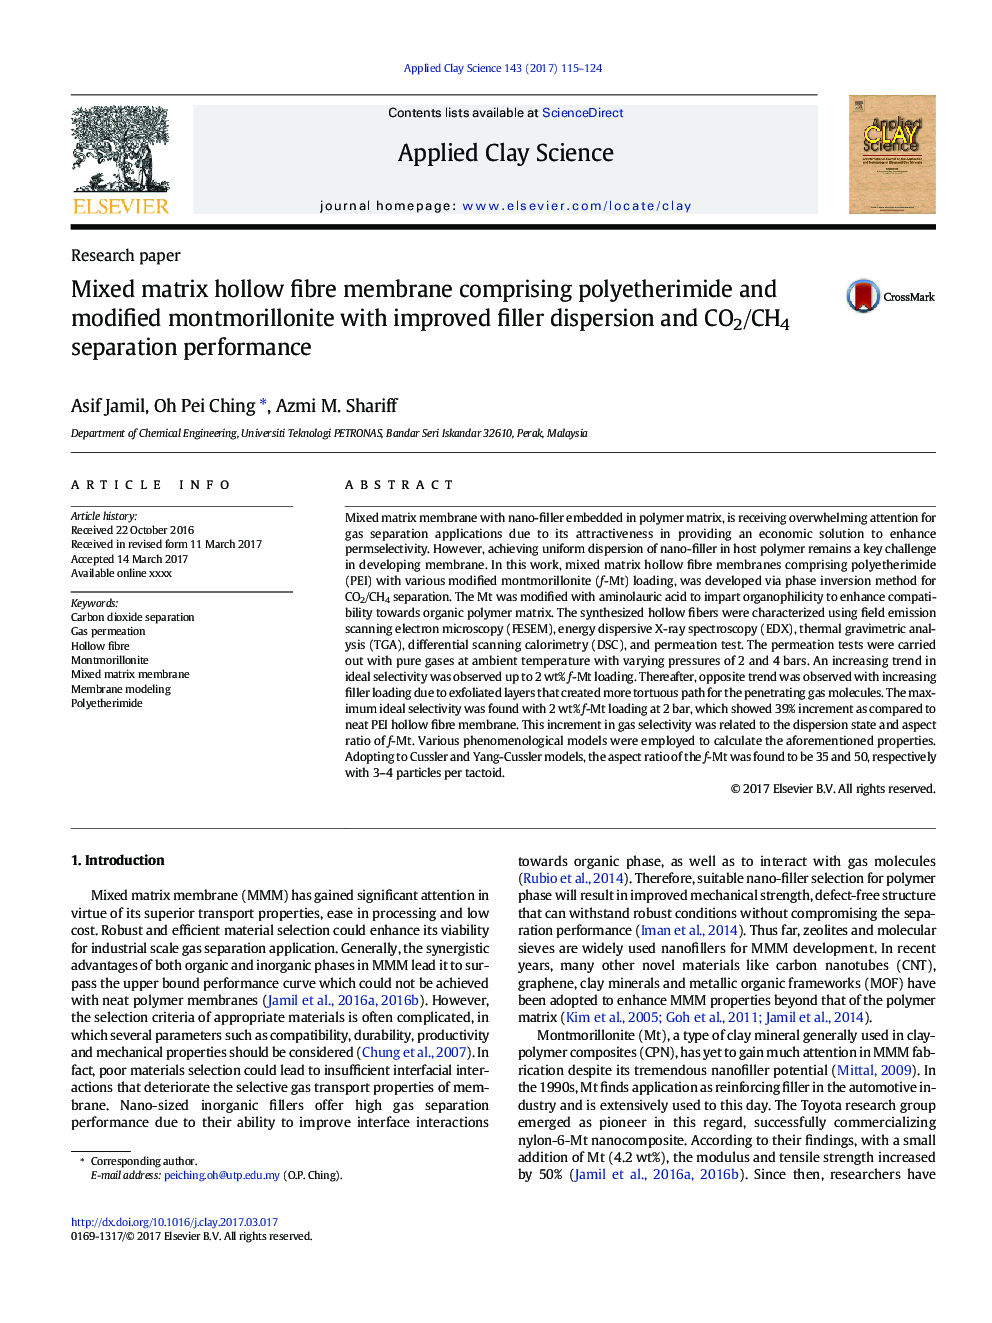 Mixed matrix hollow fibre membrane comprising polyetherimide and modified montmorillonite with improved filler dispersion and CO2/CH4 separation performance